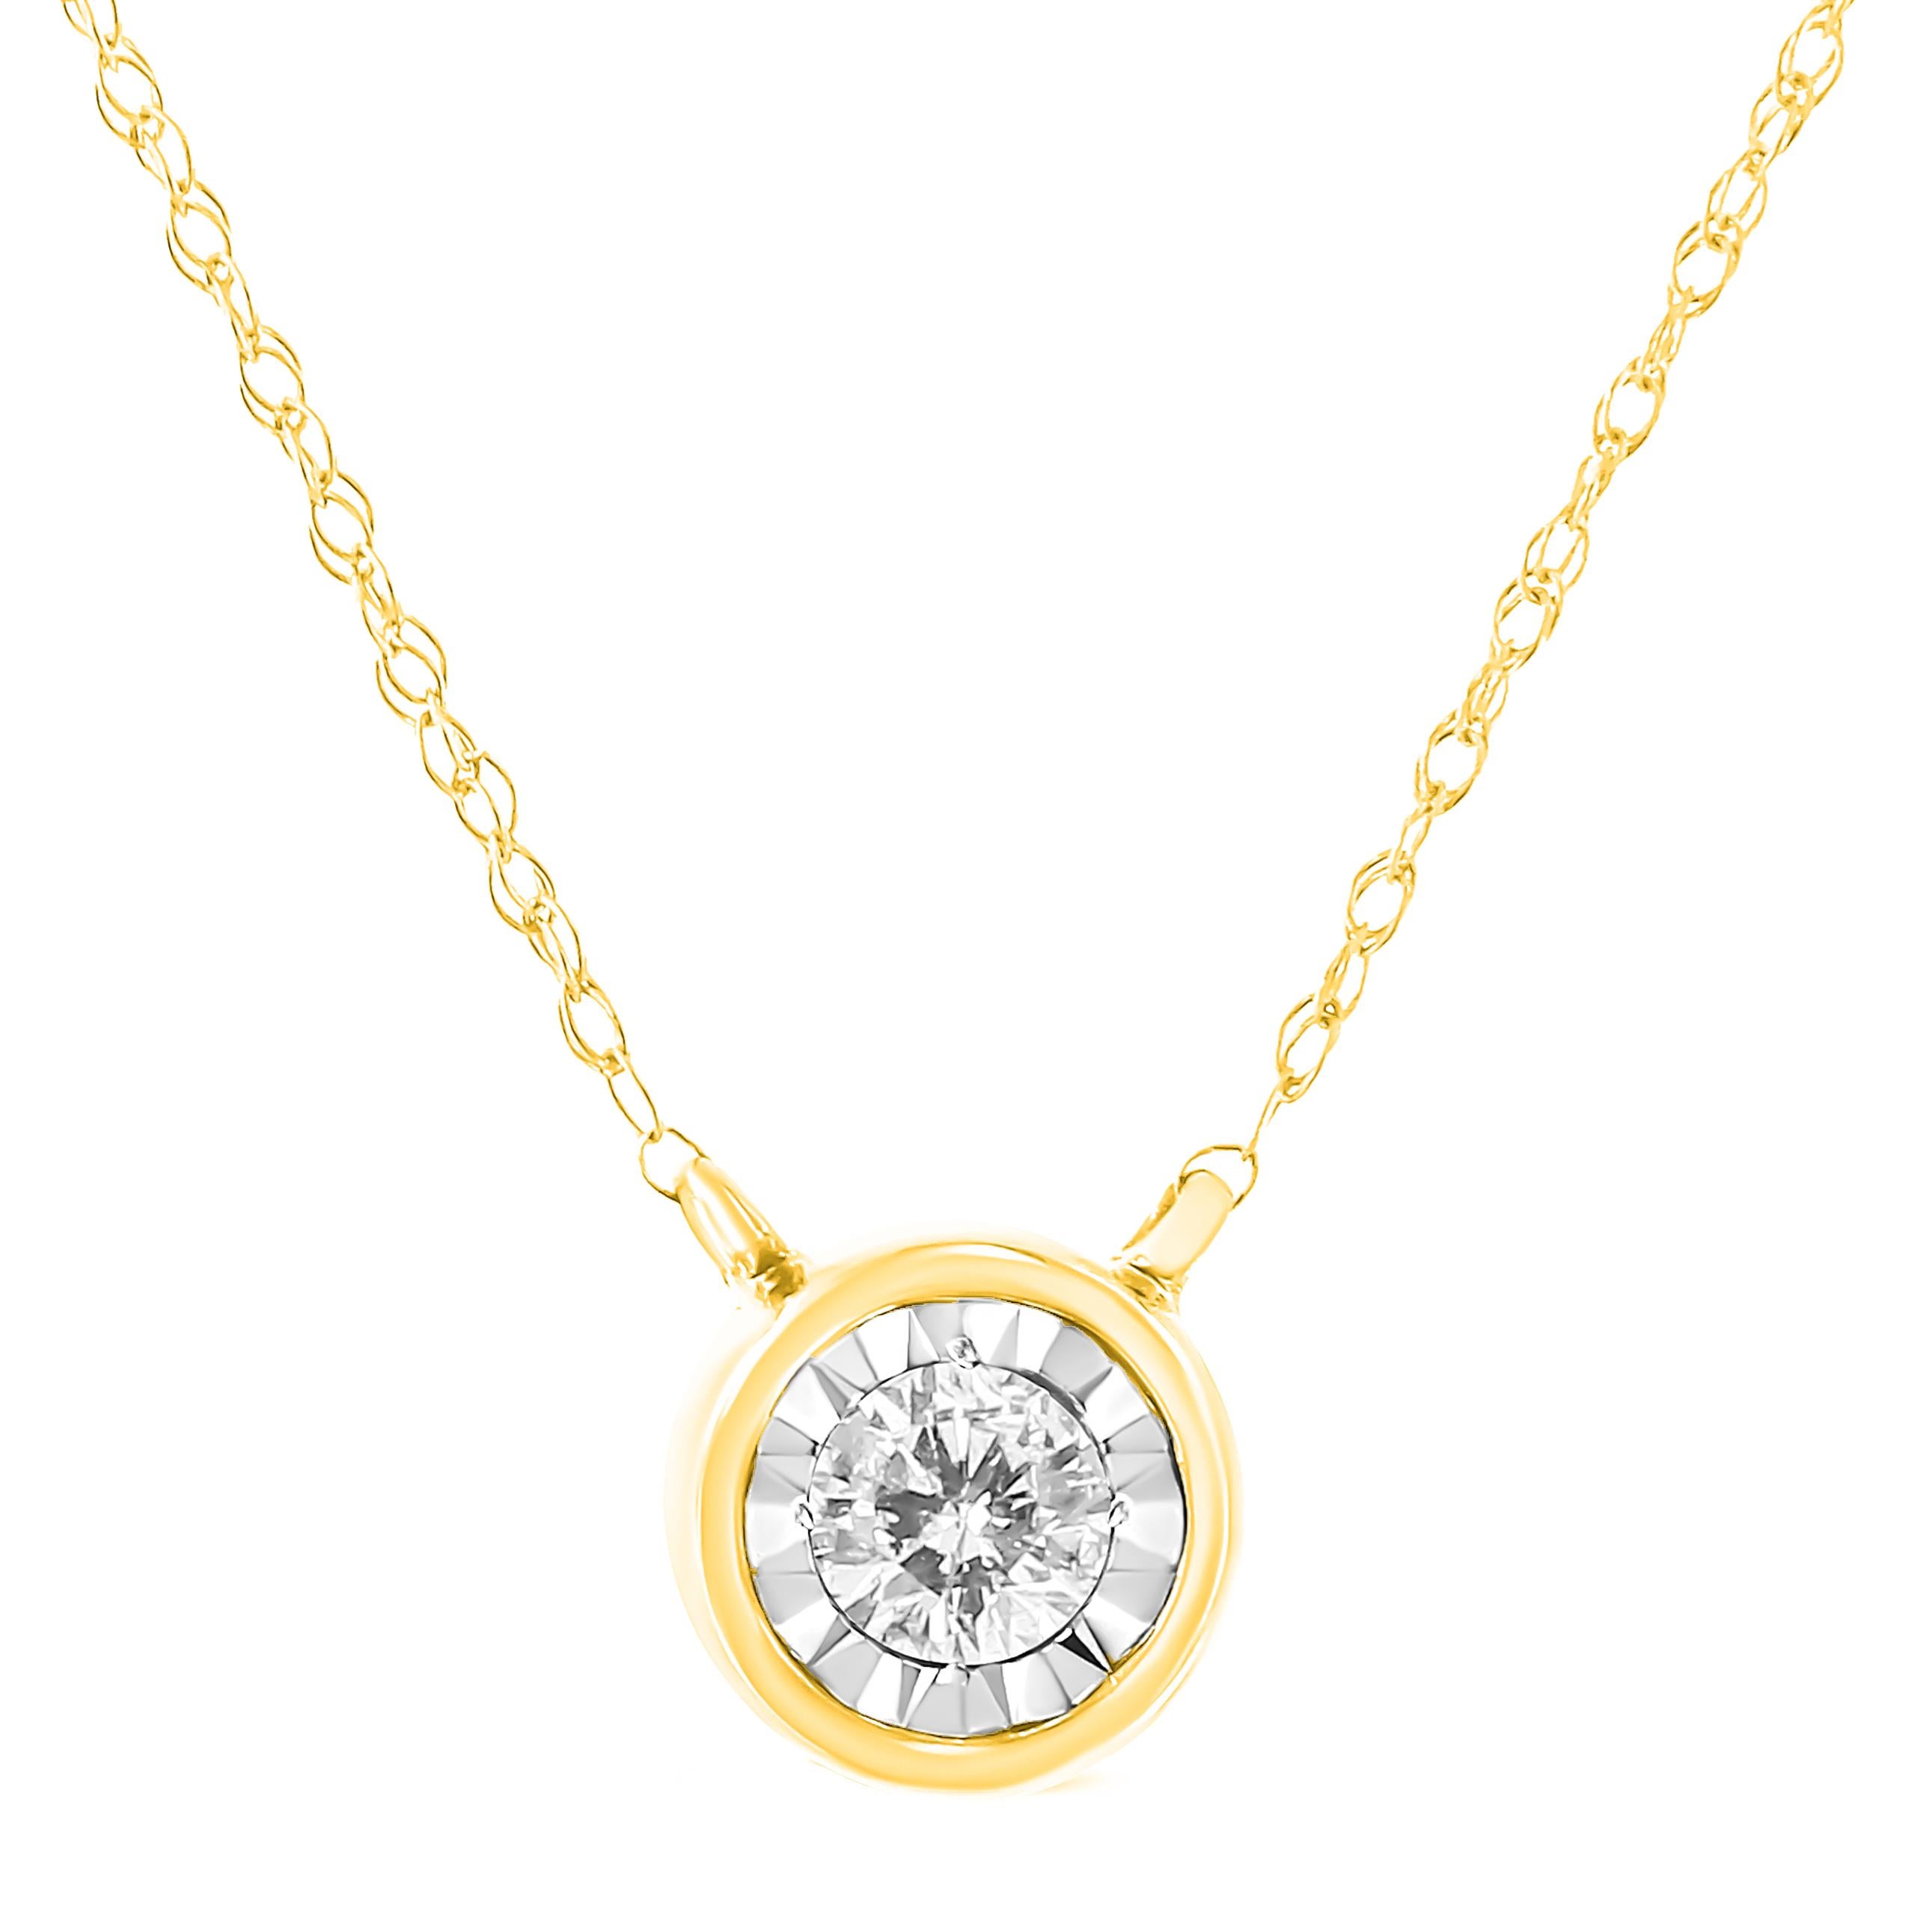 This understated yet dazzling diamond-forward piece the perfect way to highlight every big occasion, transition, and personal achievement in your life. This exquisitely simple design features your choice of either 1/5 or 1/4 cttw round brilliant cut